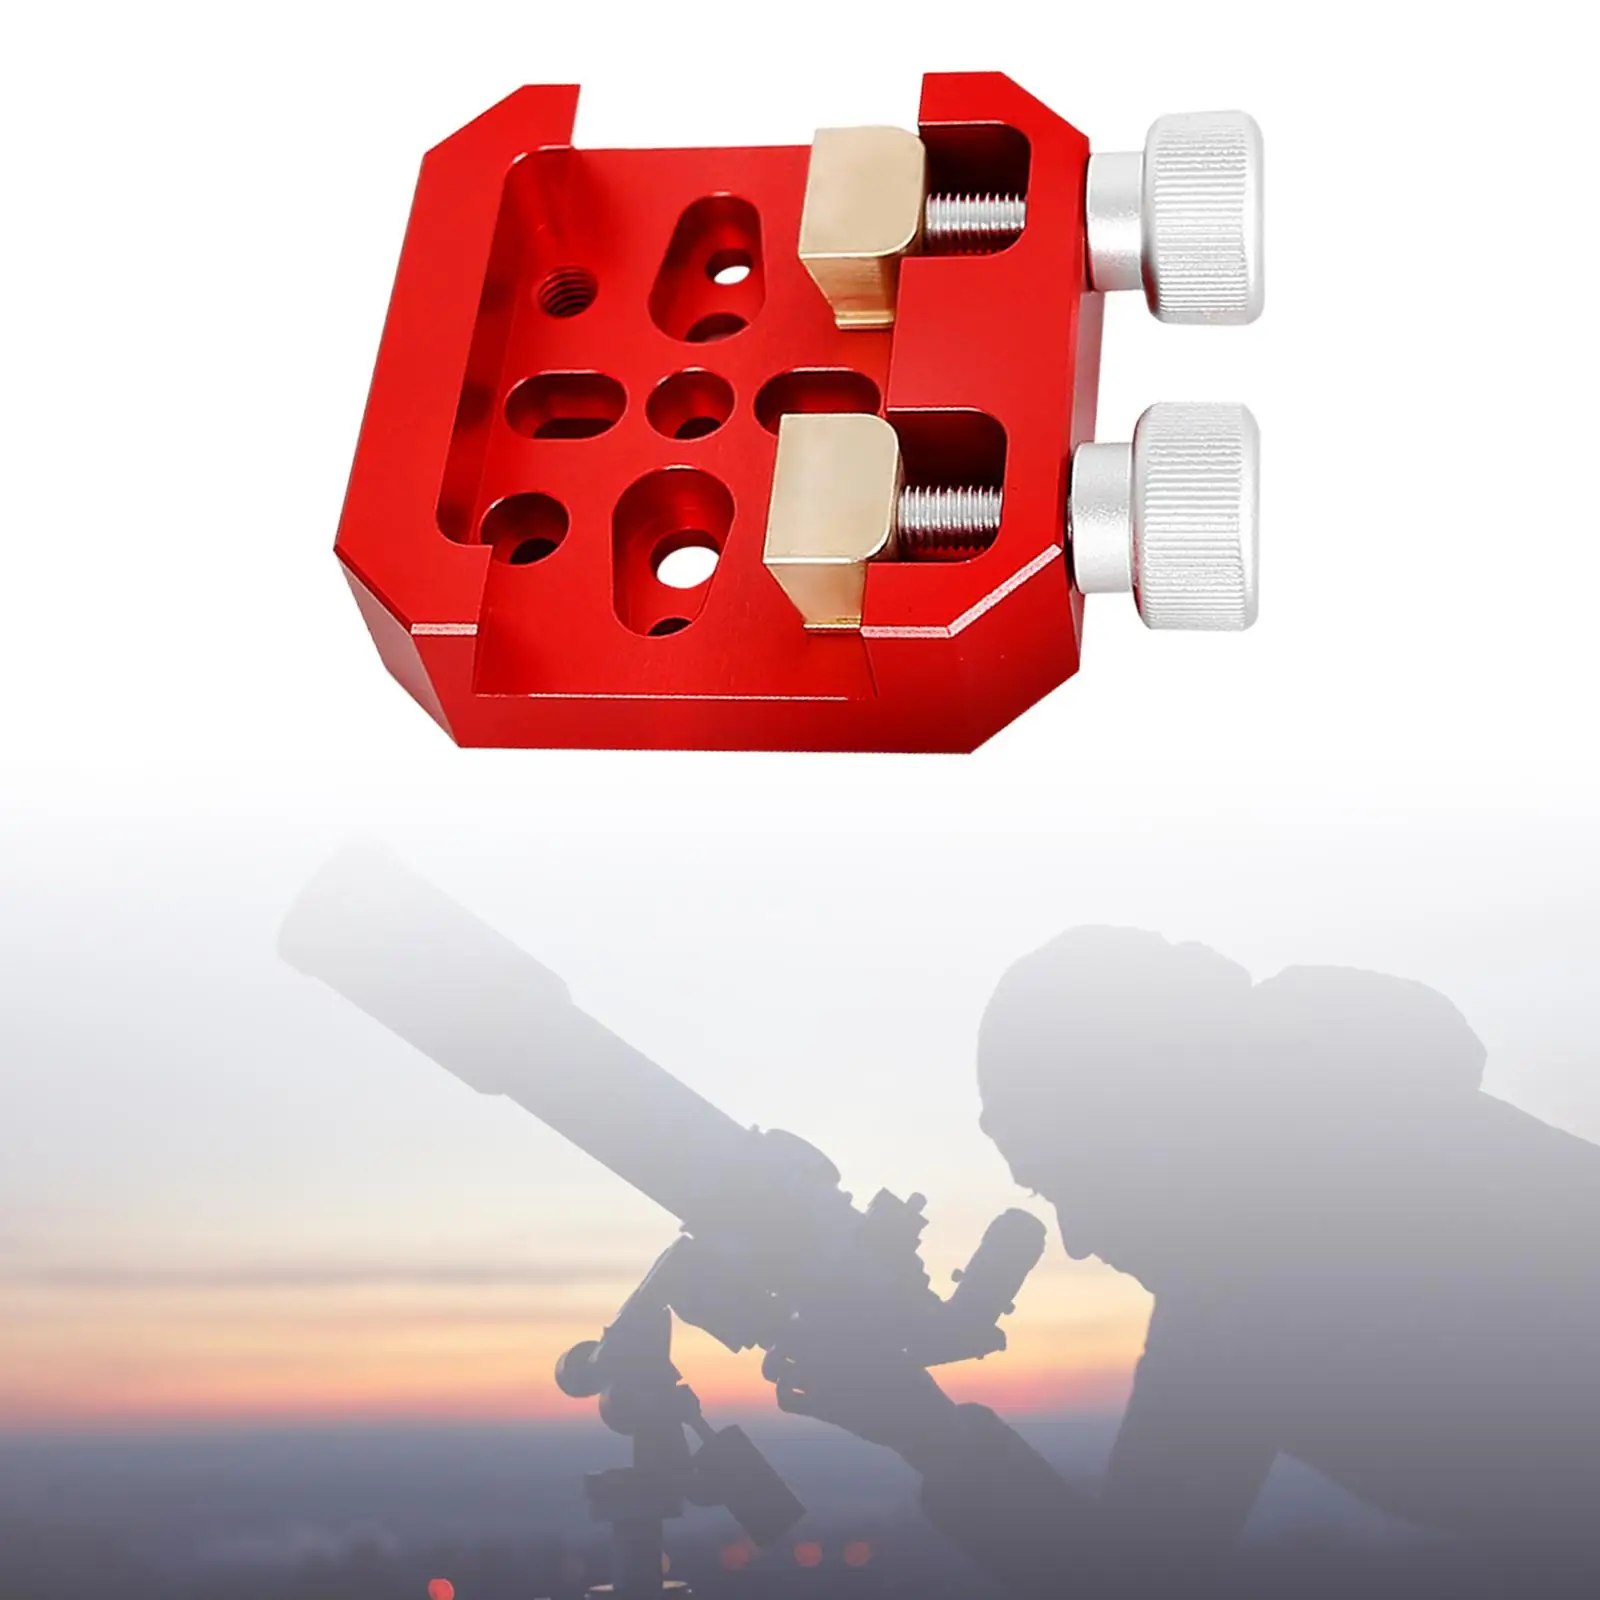 Telescope Dovetail Clamp Dovetail Groove Mount Platform Portable Universal Sturdy for Telescope Base Astrophotography Fittings